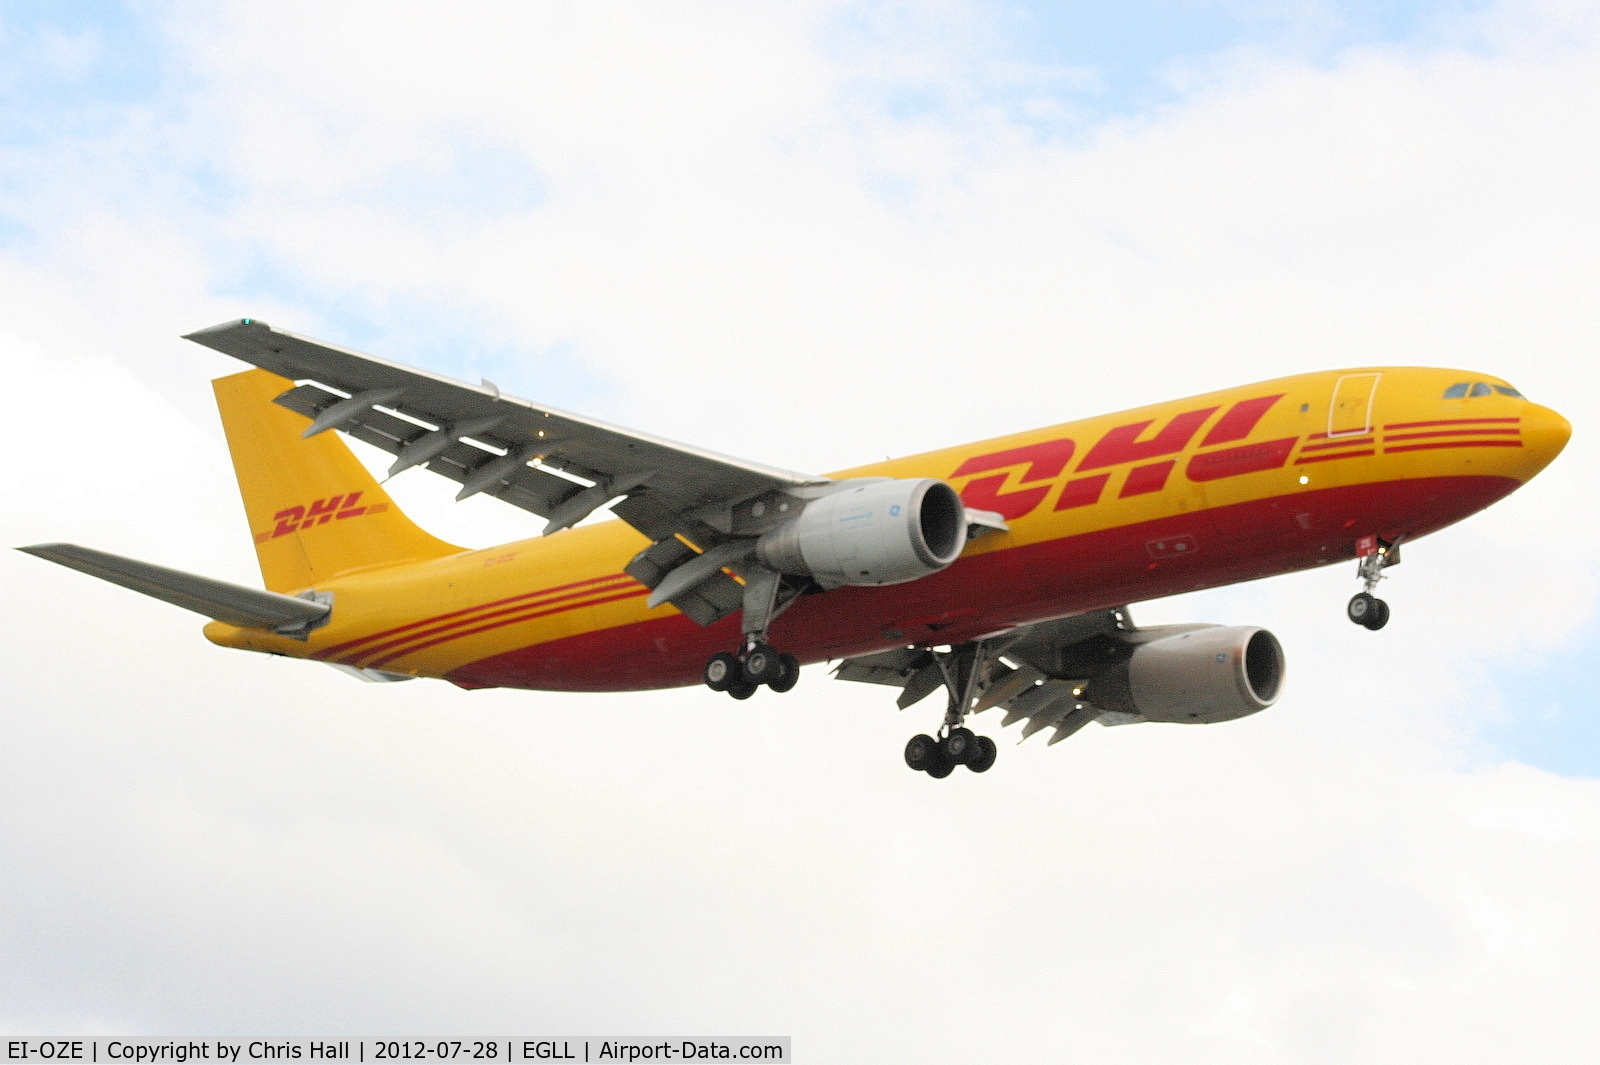 EI-OZE, 1981 Airbus A300B4-203F C/N 152, Air Contractors / DHL